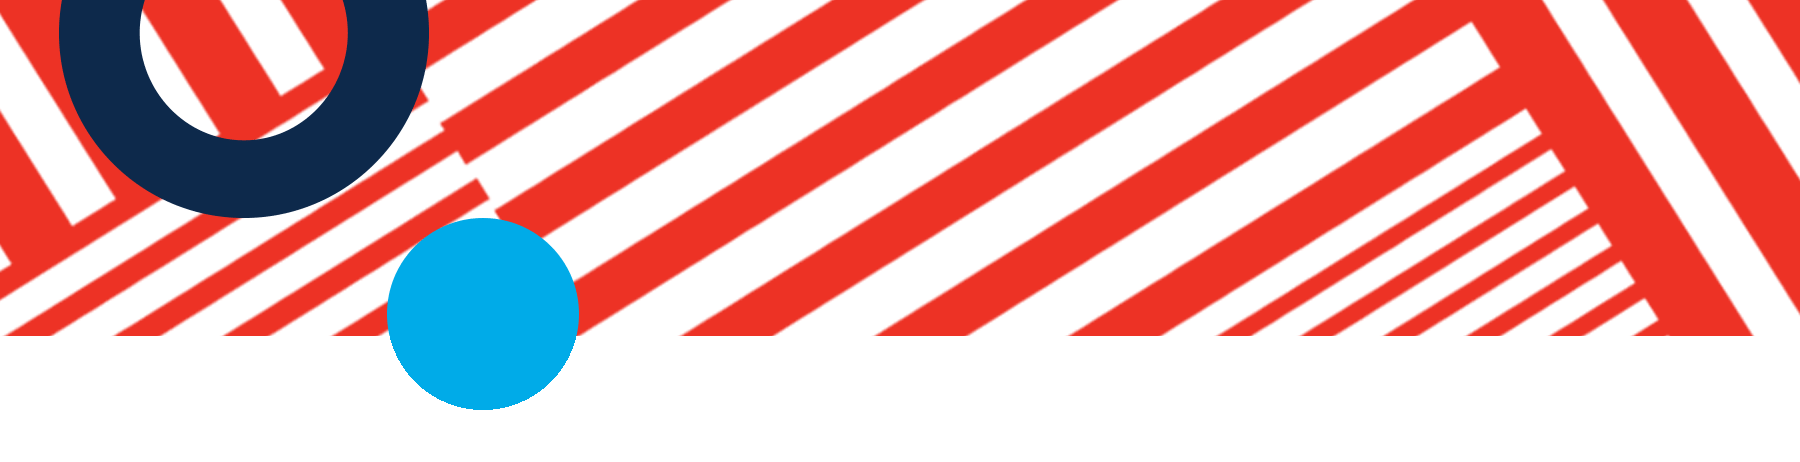 section header - red &amp; white lines